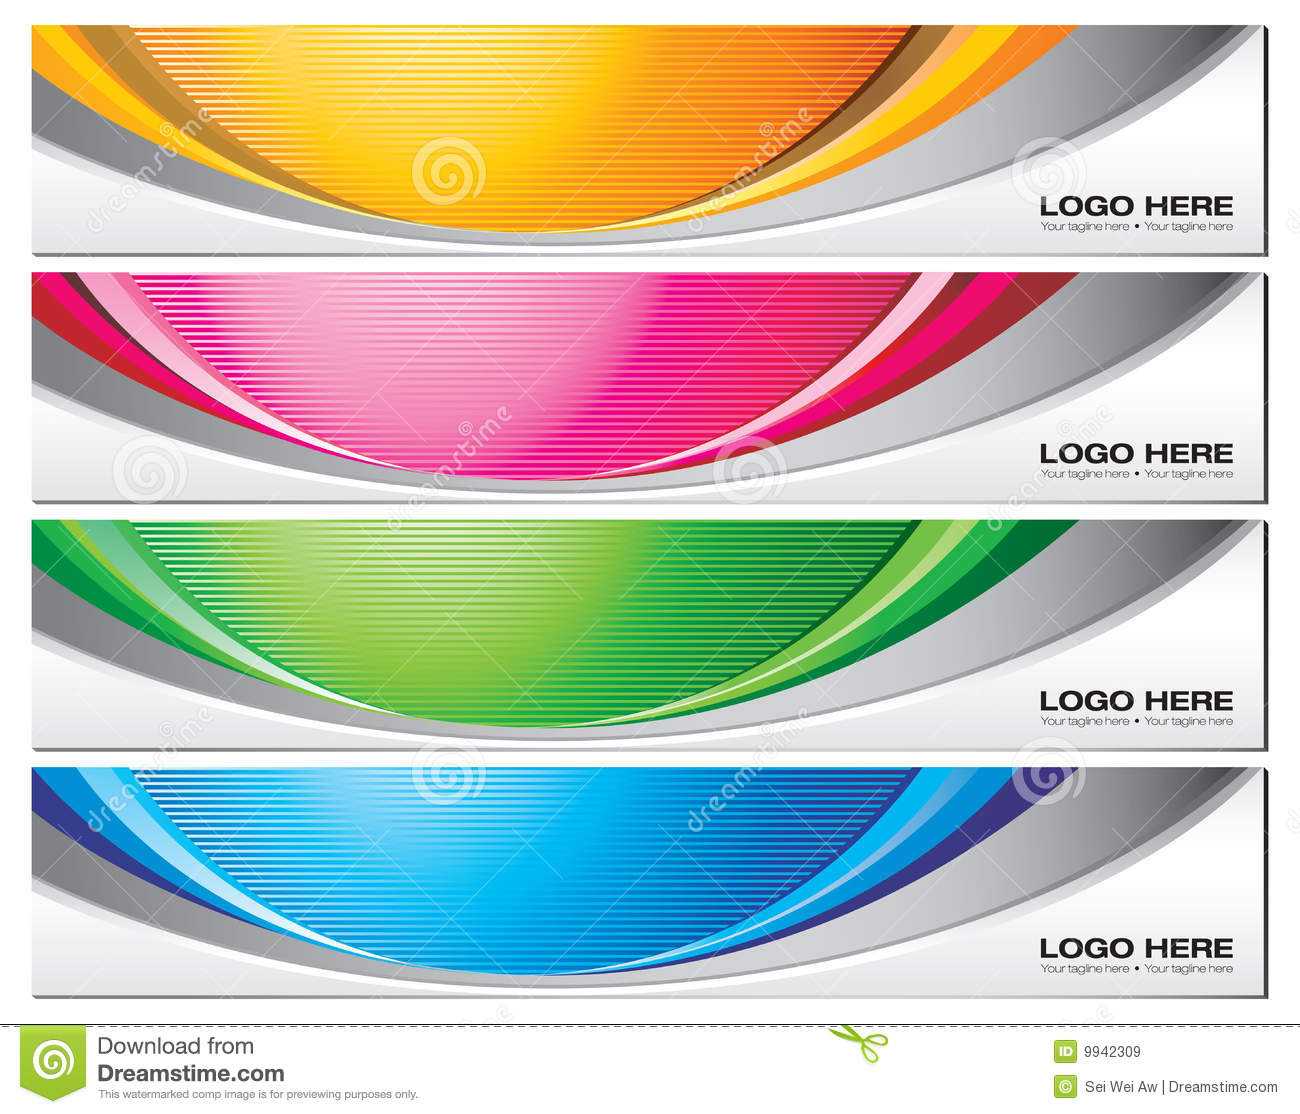 Banner Templates Stock Vector. Illustration Of Vector - 9942309 In Free Online Banner Templates